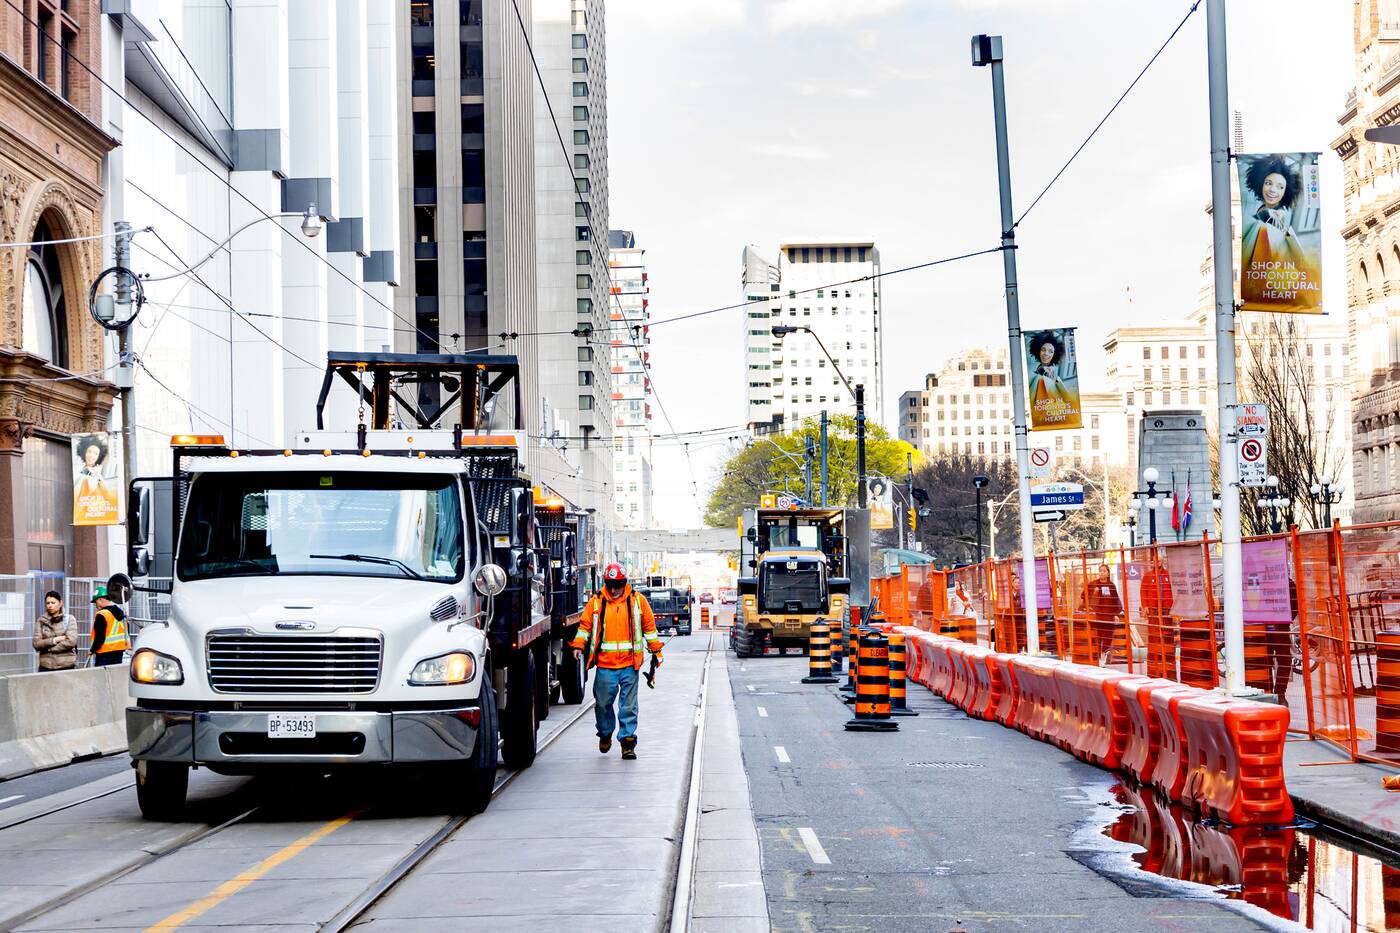 A large portion of Queen Street will close for more than four years next  week. Here's how the city will limit gridlock